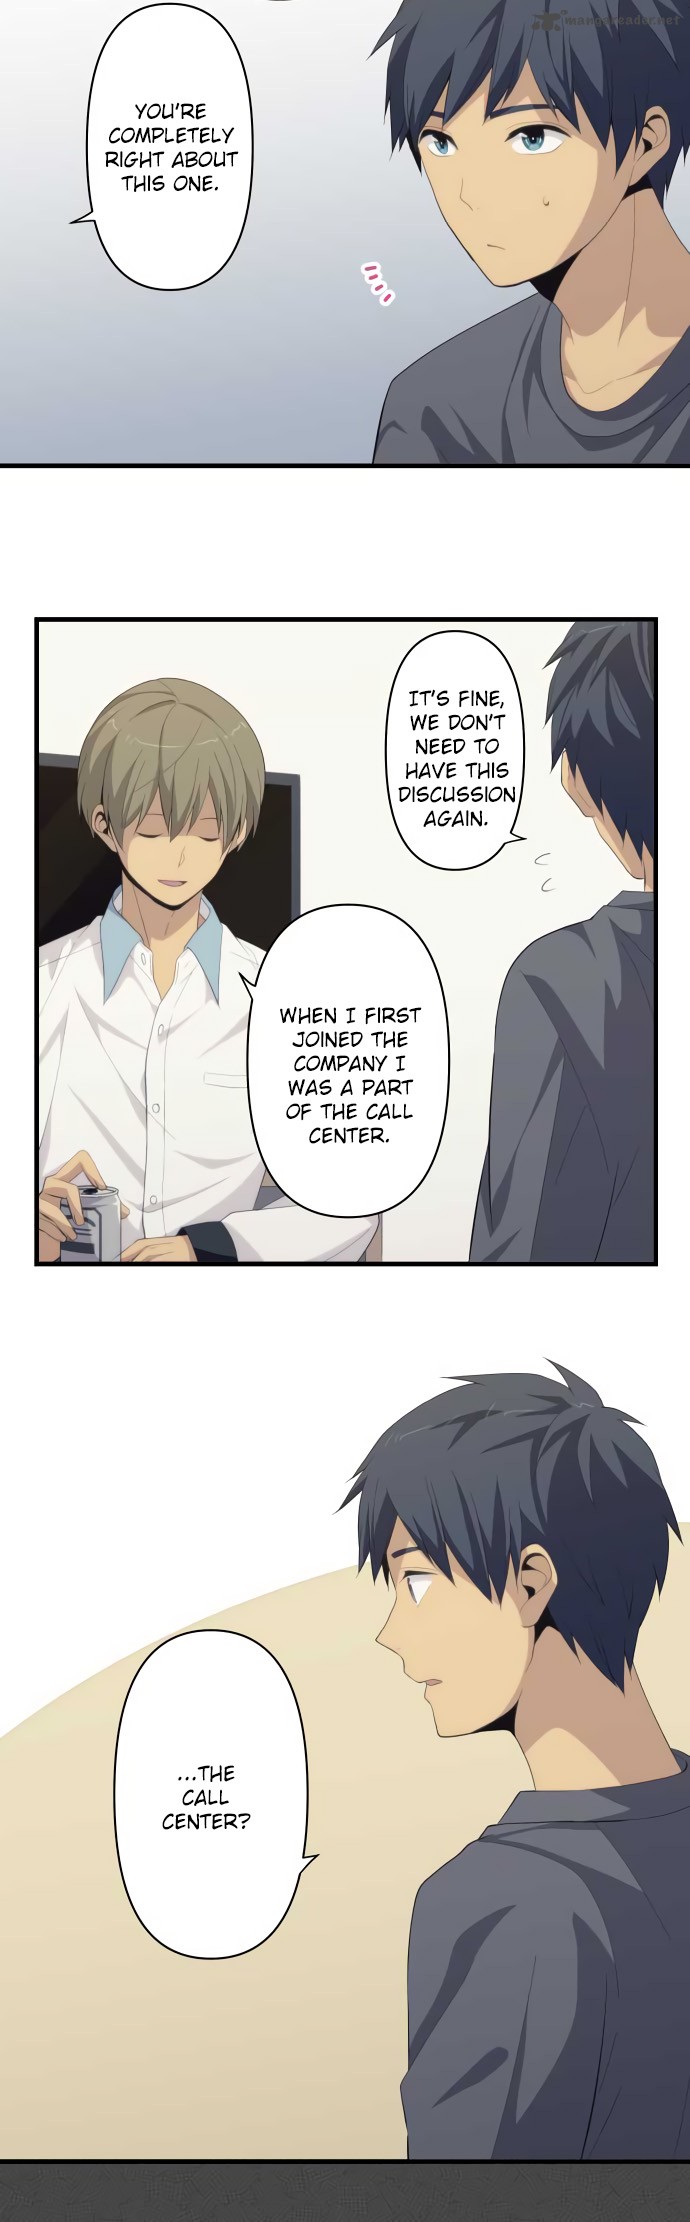 relife_179_14